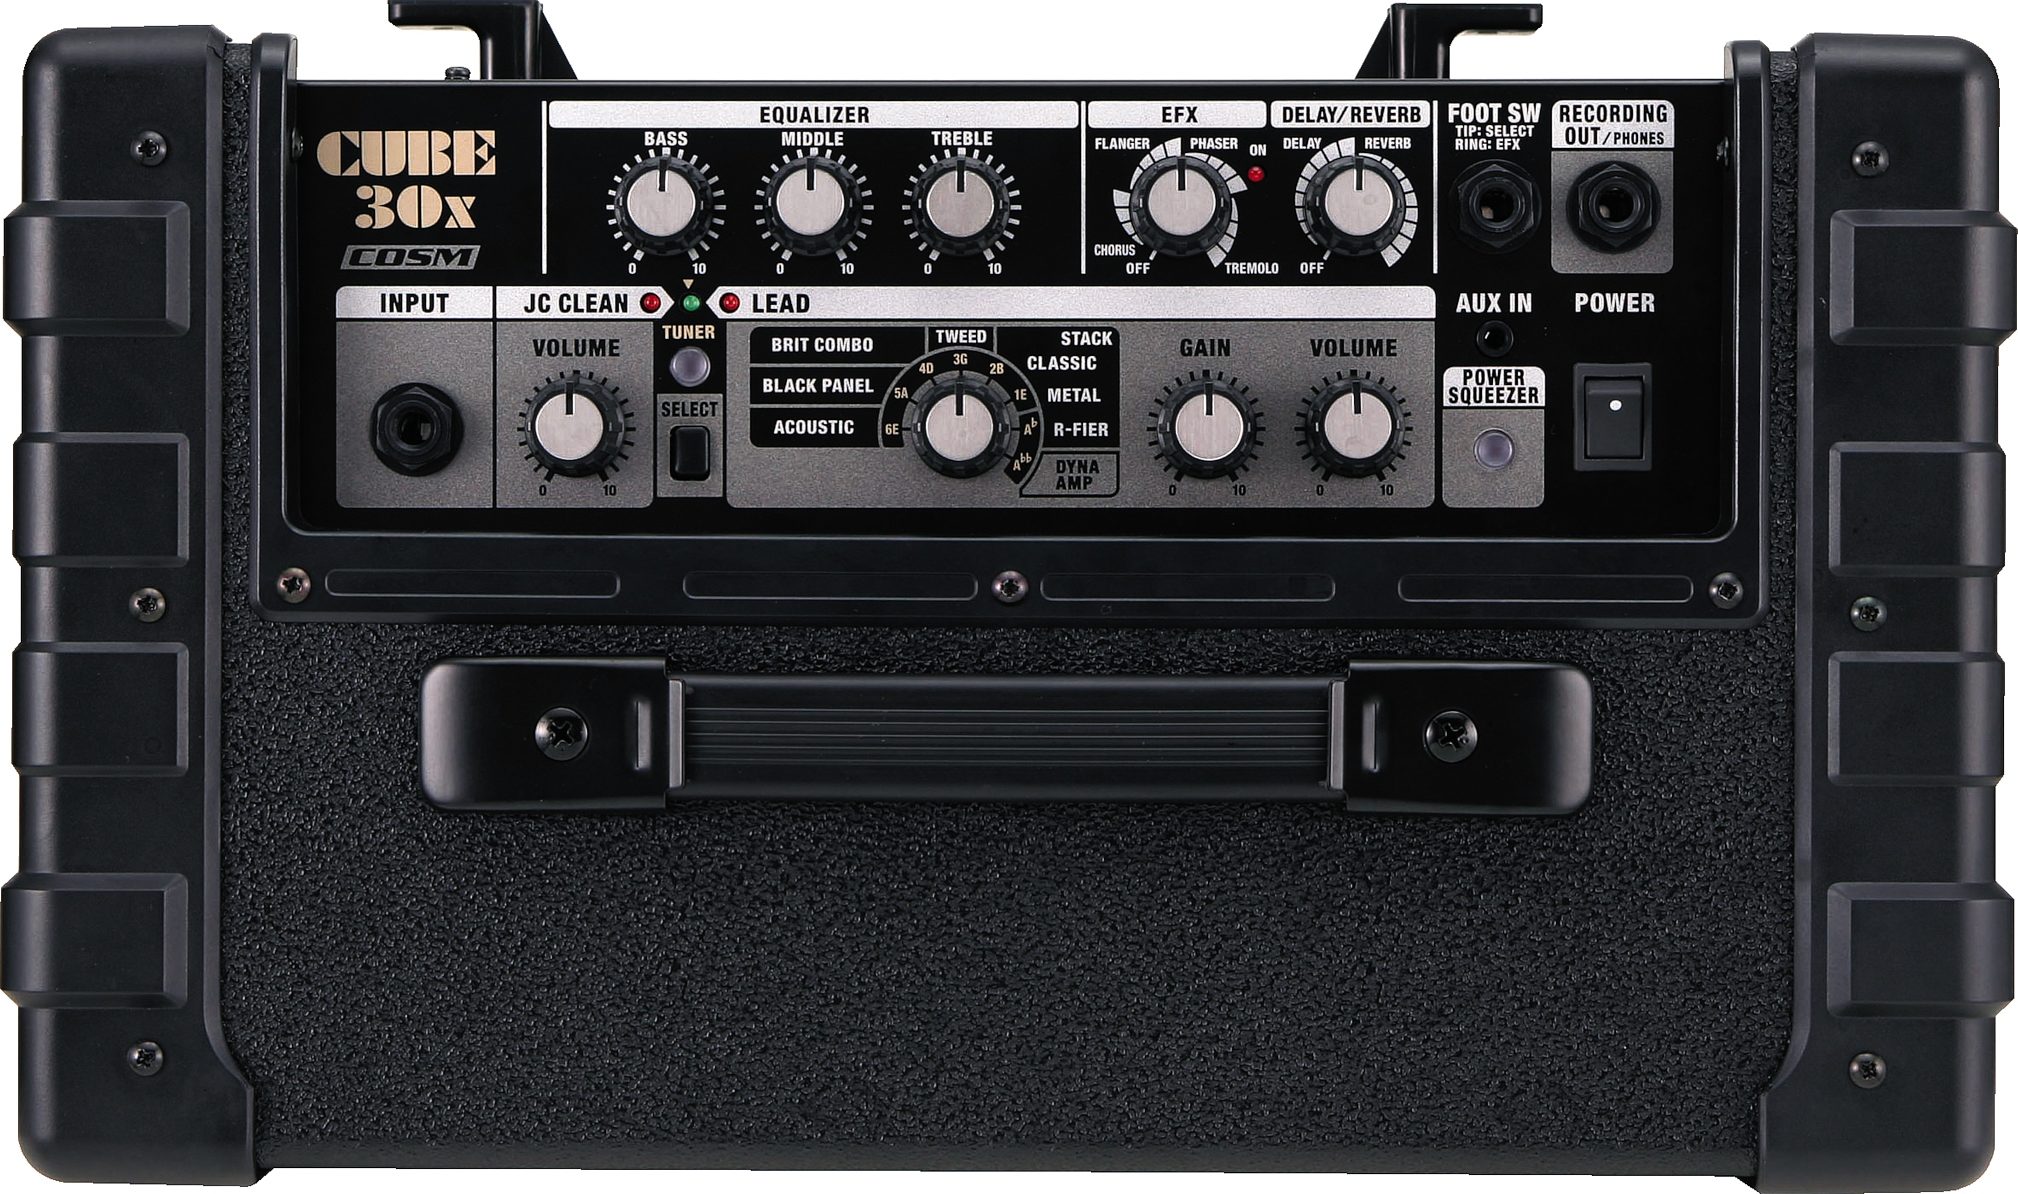 Roland Cube 30X Guitar Combo Amplifier (30 Watts, 1x10 in.)